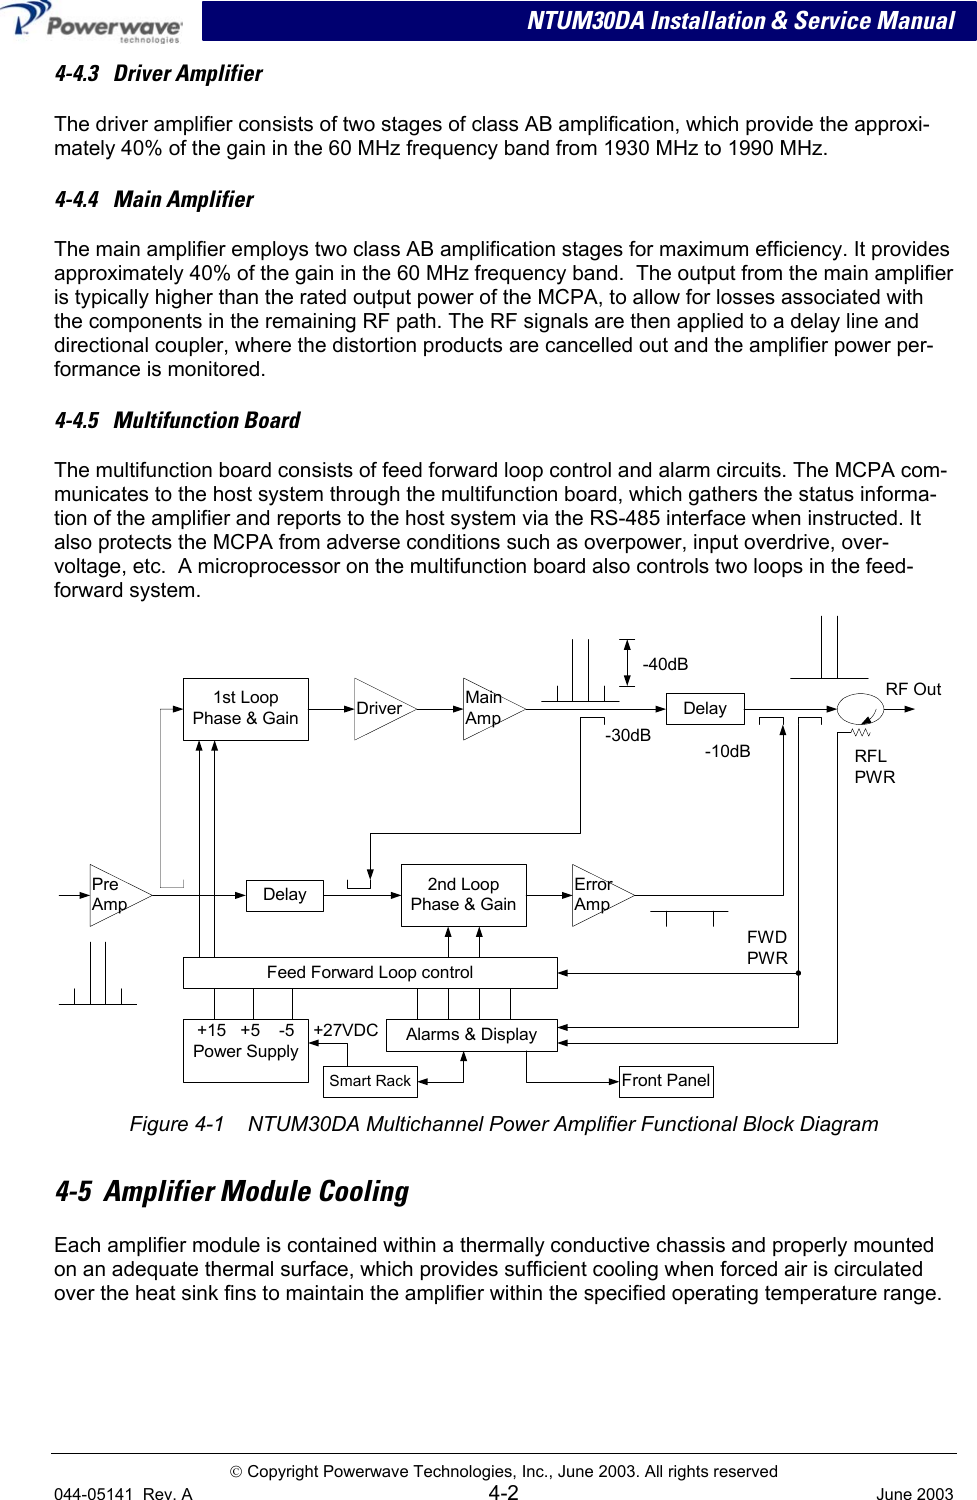 NTUM30DA Installation &amp; Service Manual 4-4.3   Driver Amplifier The driver amplifier consists of two stages of class AB amplification, which provide the approxi-mately 40% of the gain in the 60 MHz frequency band from 1930 MHz to 1990 MHz.  4-4.4   Main Amplifier The main amplifier employs two class AB amplification stages for maximum efficiency. It provides approximately 40% of the gain in the 60 MHz frequency band.  The output from the main amplifier is typically higher than the rated output power of the MCPA, to allow for losses associated with the components in the remaining RF path. The RF signals are then applied to a delay line and directional coupler, where the distortion products are cancelled out and the amplifier power per-formance is monitored.  4-4.5   Multifunction Board The multifunction board consists of feed forward loop control and alarm circuits. The MCPA com-municates to the host system through the multifunction board, which gathers the status informa-tion of the amplifier and reports to the host system via the RS-485 interface when instructed. It also protects the MCPA from adverse conditions such as overpower, input overdrive, over-voltage, etc.  A microprocessor on the multifunction board also controls two loops in the feed-forward system. PreAmpDriver MainAmpErrorAmpDelayFeed Forward Loop control2nd LoopPhase &amp; Gain1st LoopPhase &amp; Gain DelayAlarms &amp; Display+15   +5    -5Power Supply-30dB -10dB-40dBRF OutRFLPWRFWDPWRFront PanelSmart Rack+27VDC Figure 4-1    NTUM30DA Multichannel Power Amplifier Functional Block Diagram 4-5  Amplifier Module Cooling Each amplifier module is contained within a thermally conductive chassis and properly mounted on an adequate thermal surface, which provides sufficient cooling when forced air is circulated over the heat sink fins to maintain the amplifier within the specified operating temperature range.  Copyright Powerwave Technologies, Inc., June 2003. All rights reserved 044-05141  Rev. A 4-2  June 2003 